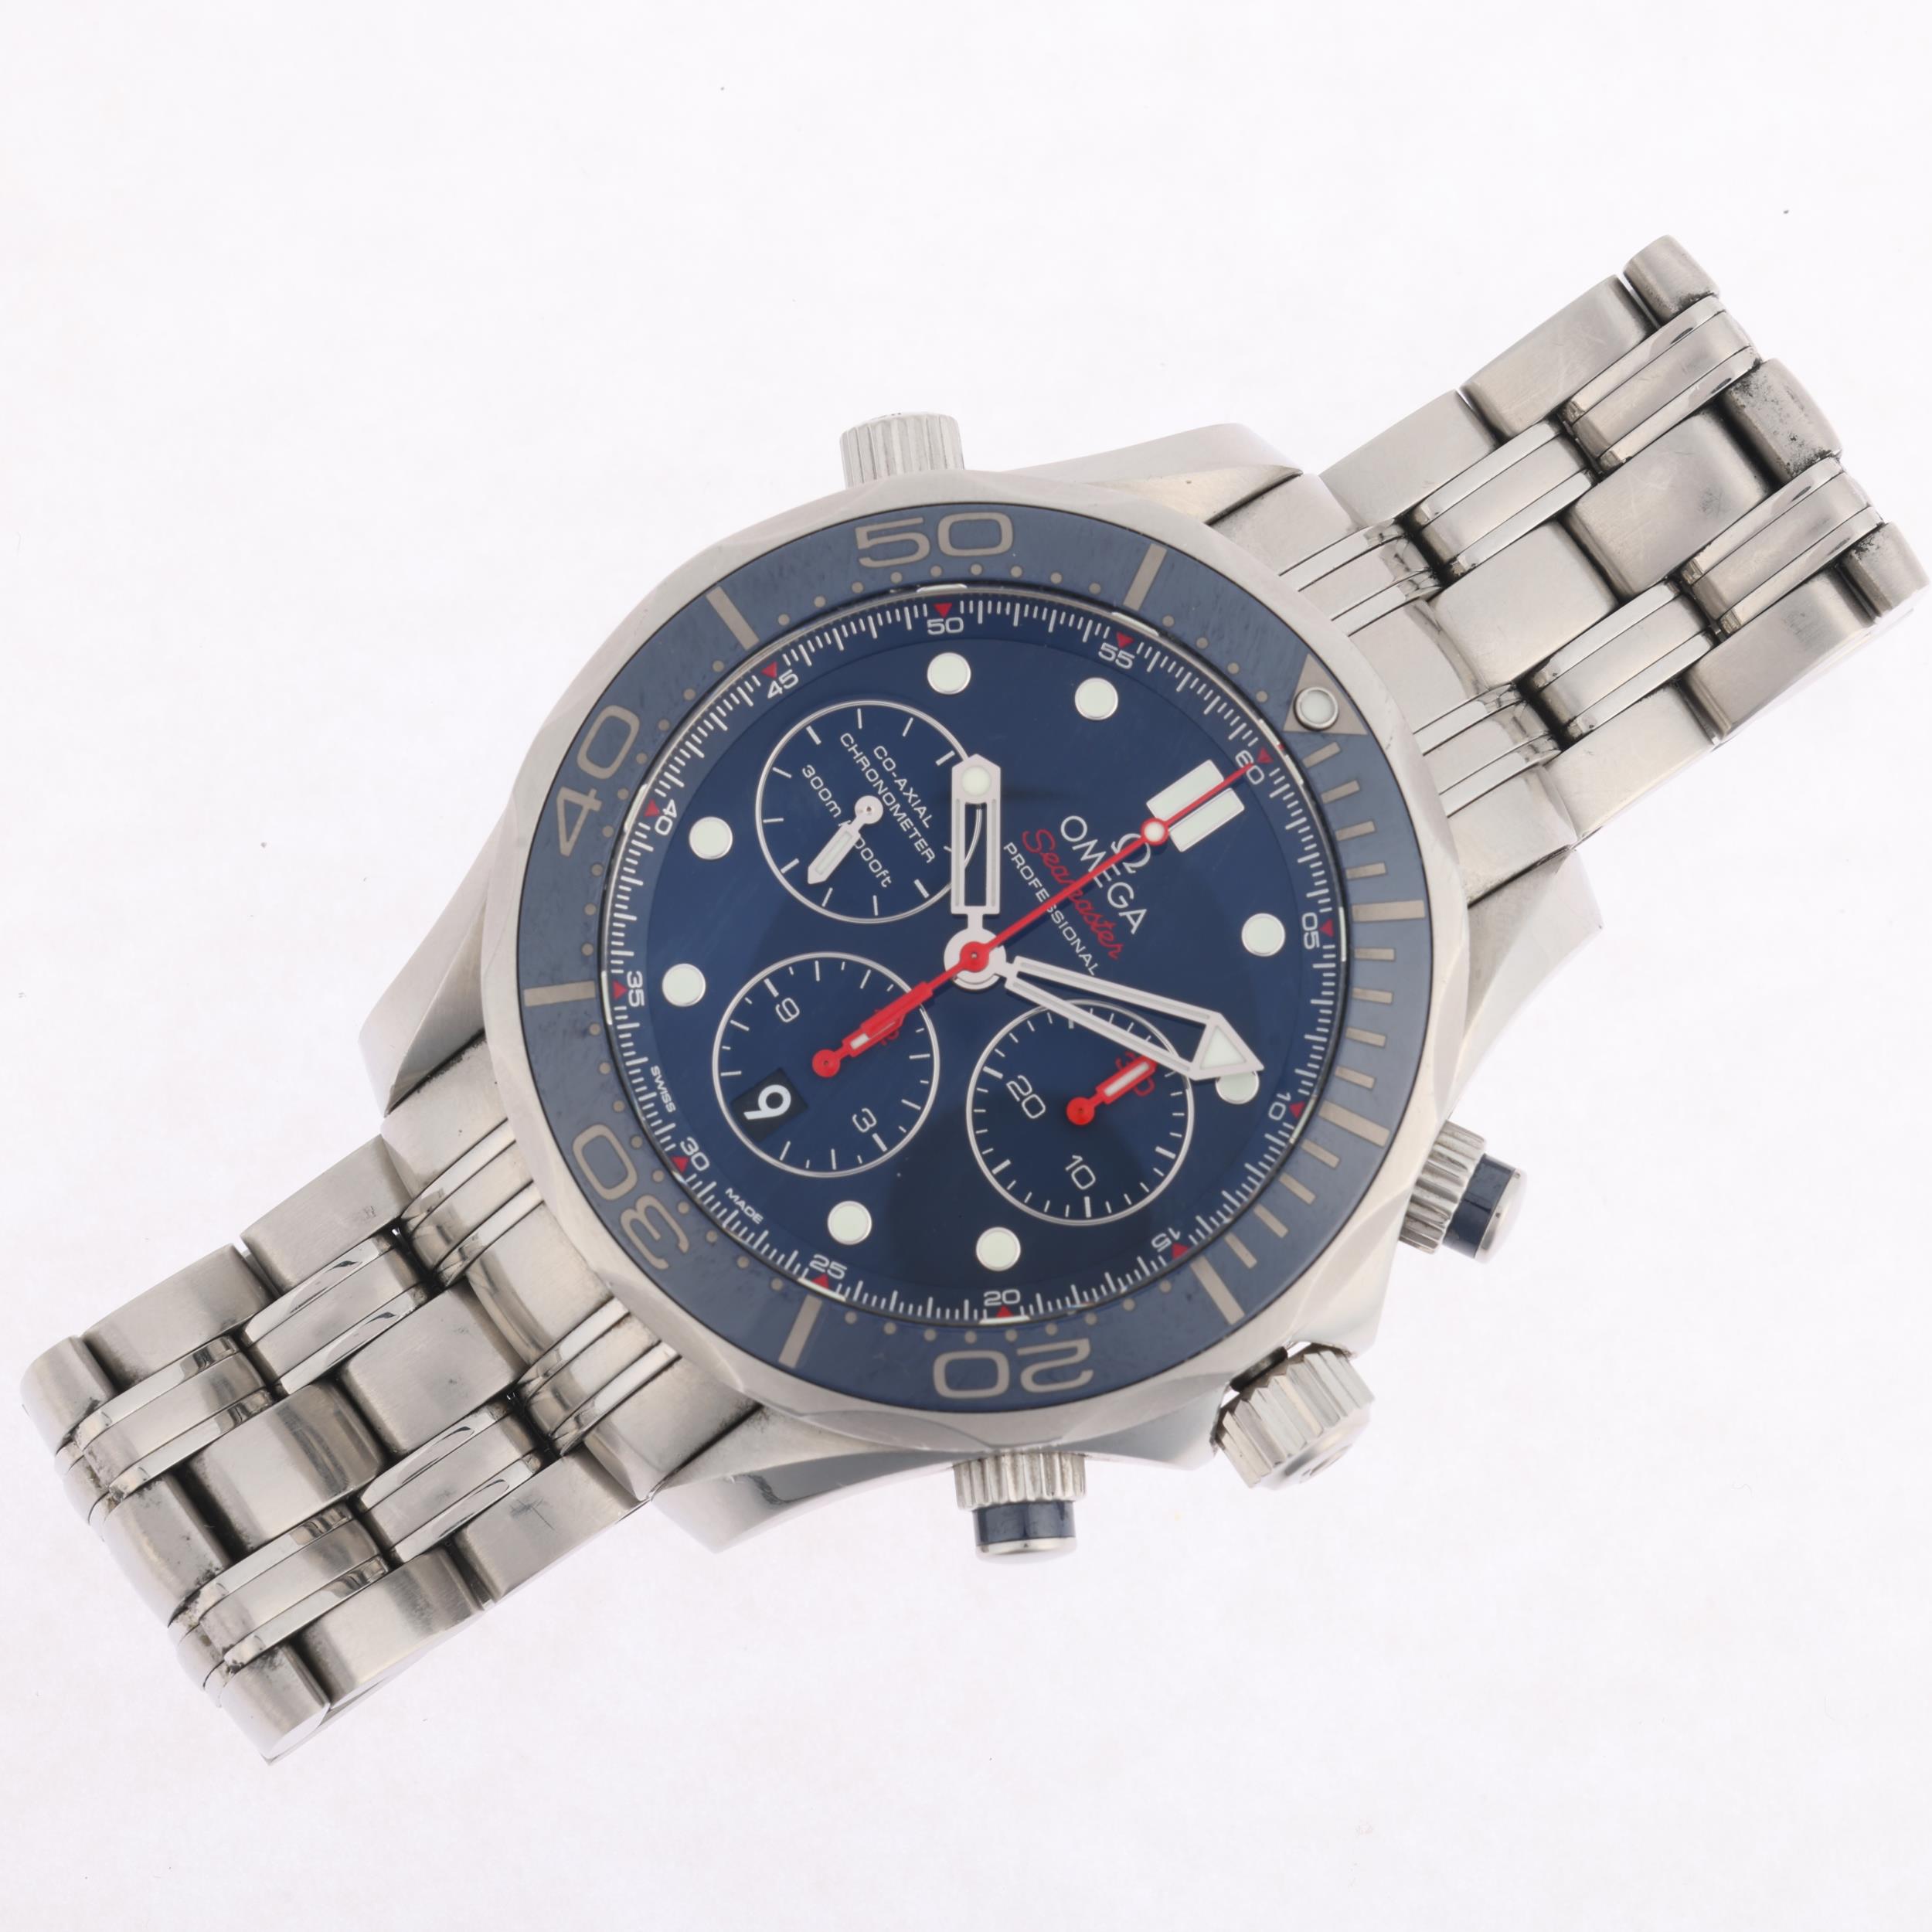 OMEGA - a stainless steel Seamaster Professional Co-Axial Chronometer automatic chronograph bracelet - Image 2 of 5